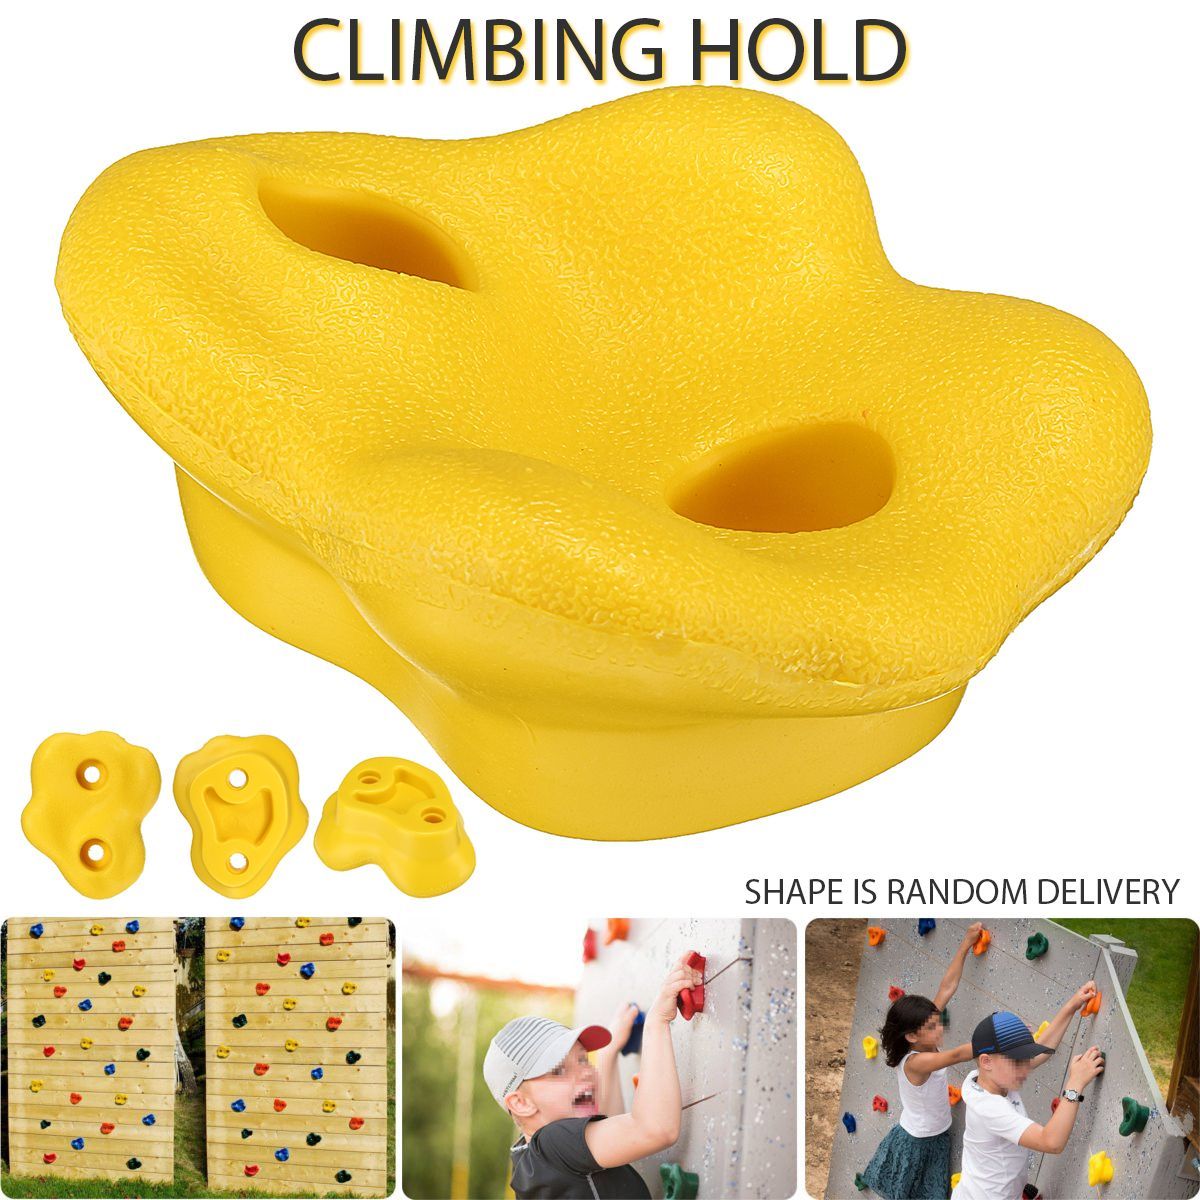 Yellow-Climbing-Rock-Wall-Textured-Bolt-Grab-Holds-Grip-Stones-Indoor-Outdoor-Kid-Decorations-1529767